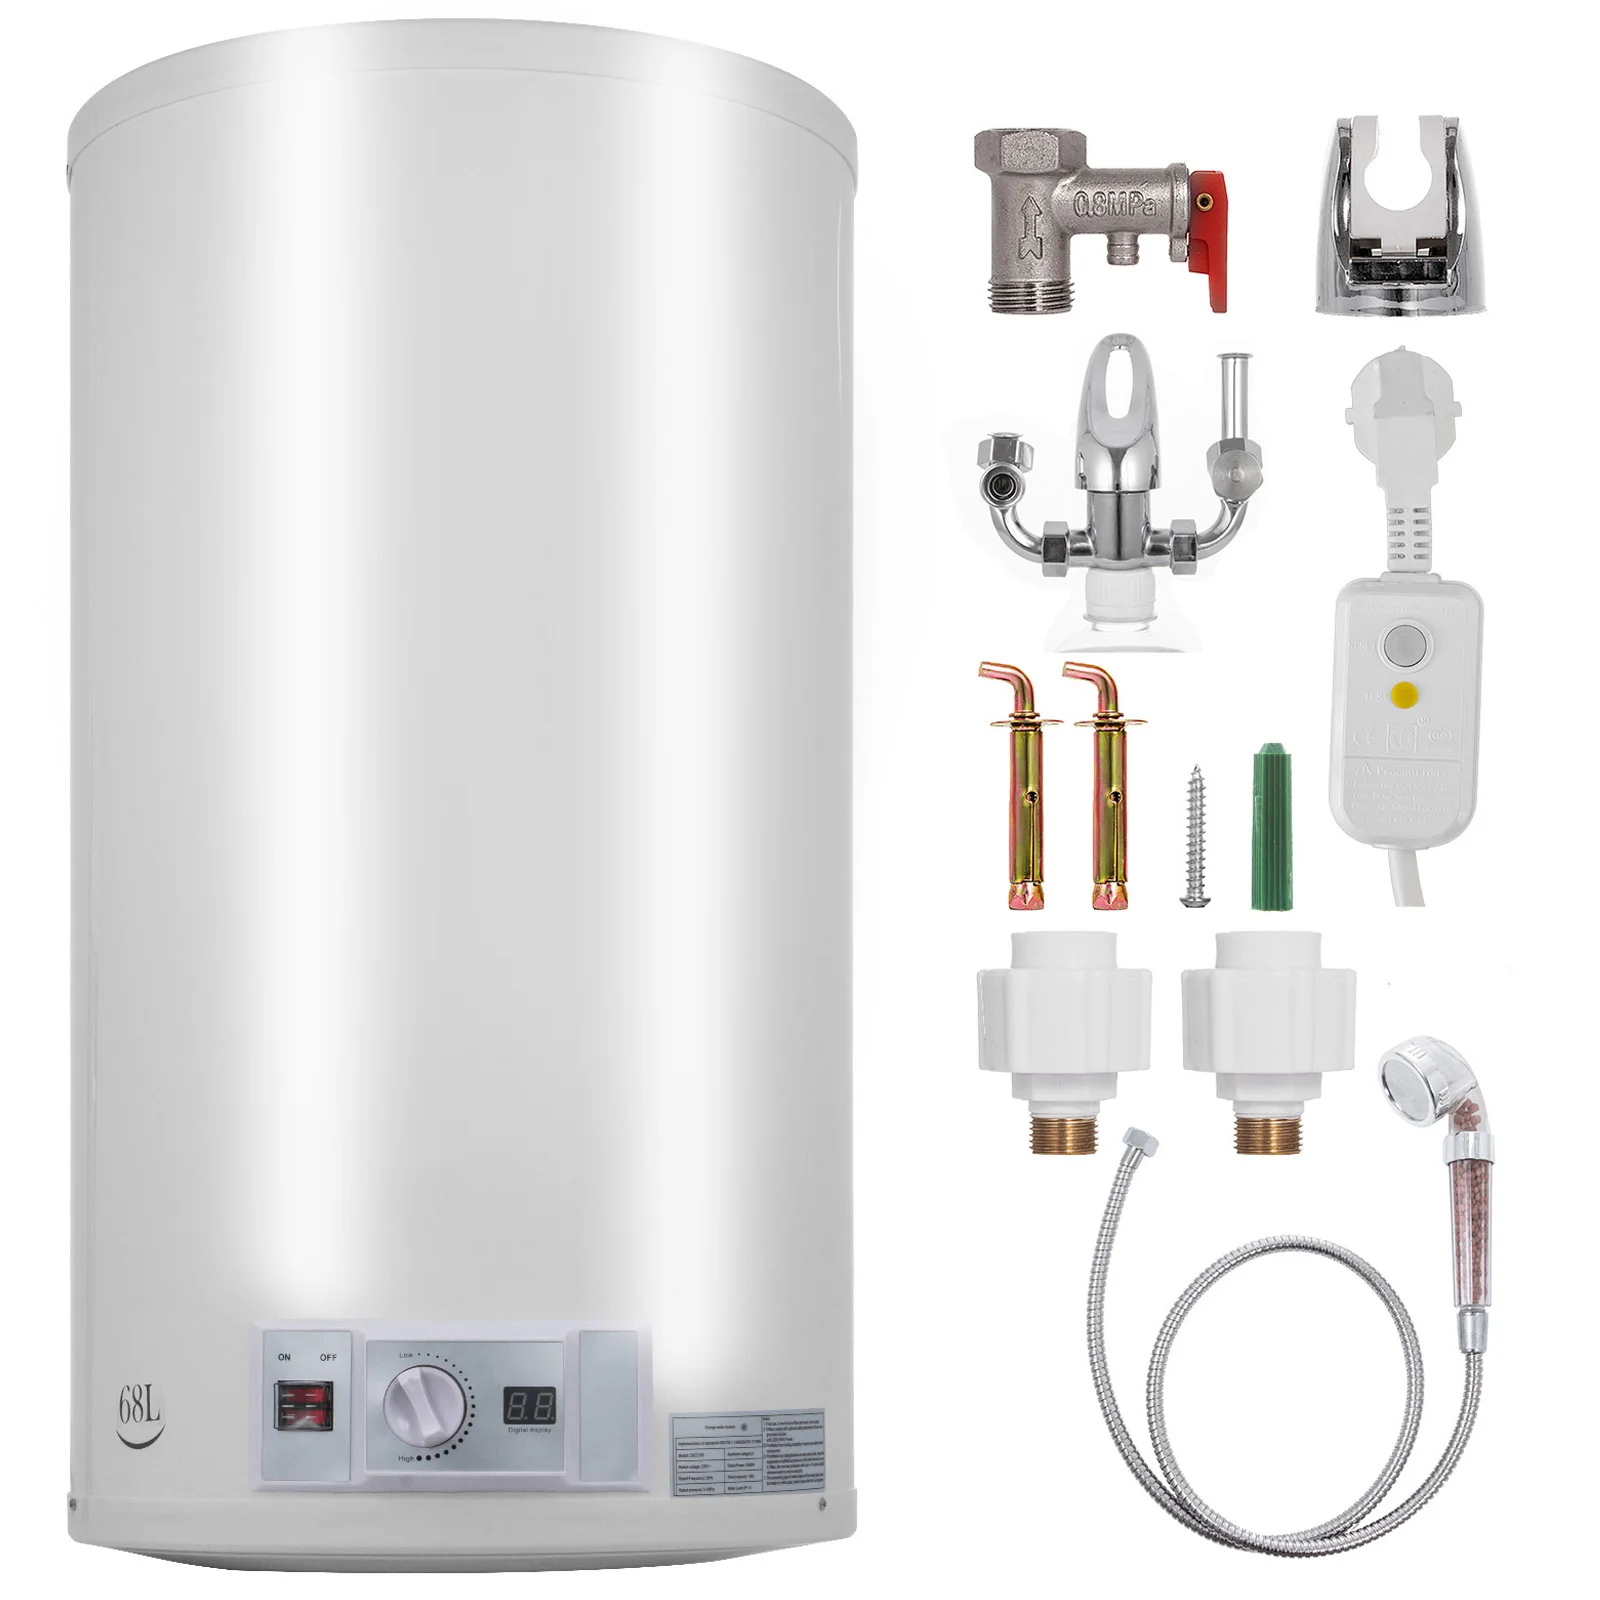 2kw 80l Electric Hot Water Heater Boiler Cylinder Tank Storage Water Heater For Kitchen & Bath - Buy 80l Electric Hot Water Heater,Tank Storage Water Heater,Electric Tank Storage Water Heater Product on